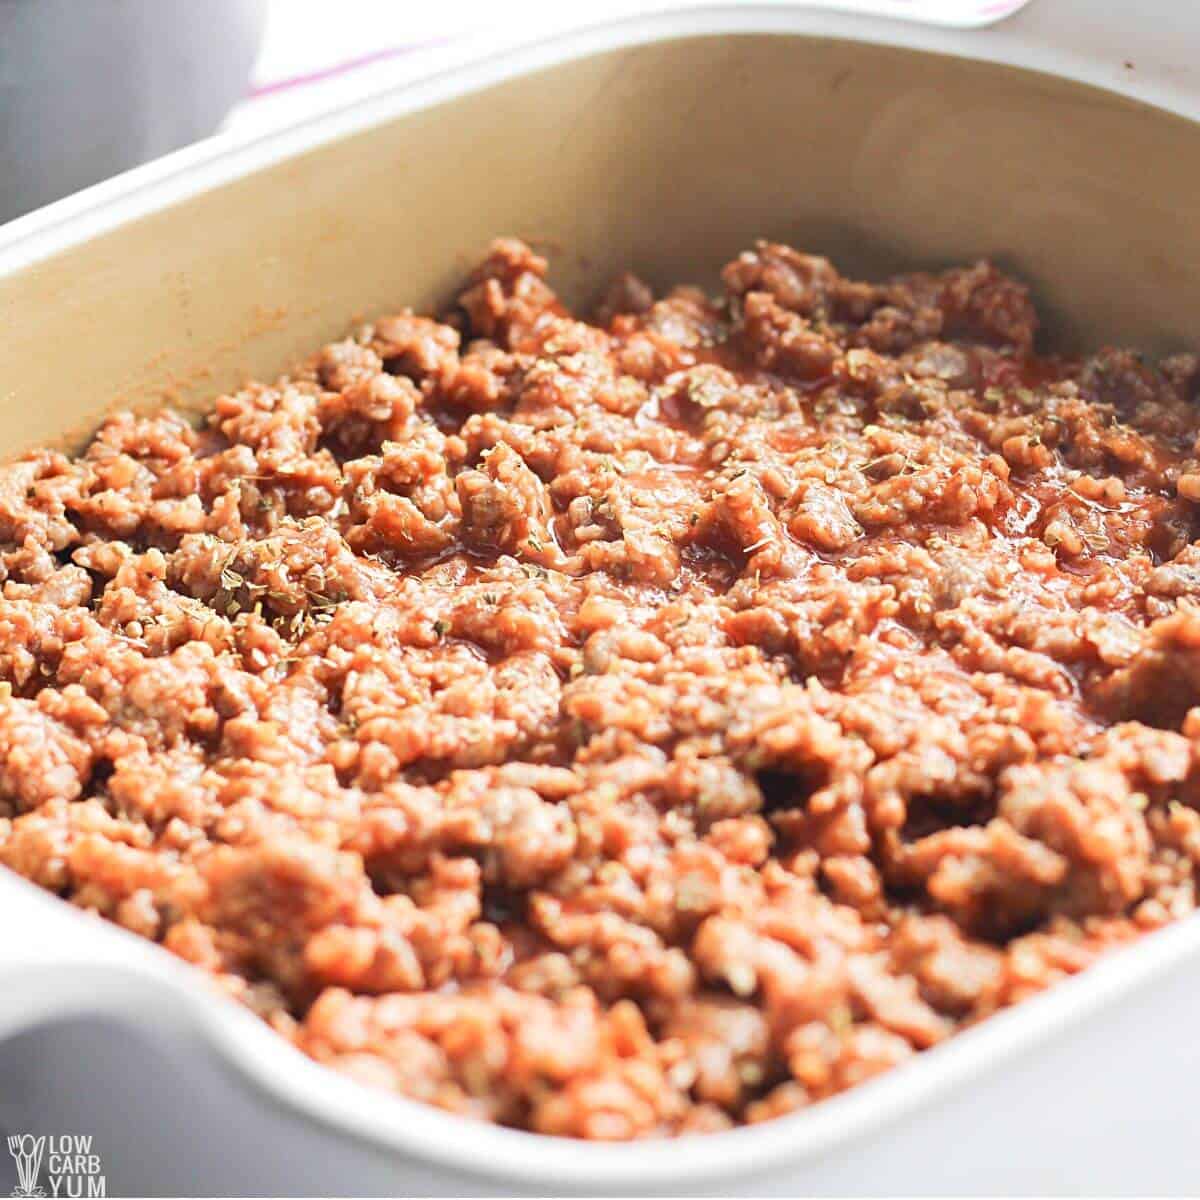 meat layer in baking pan.